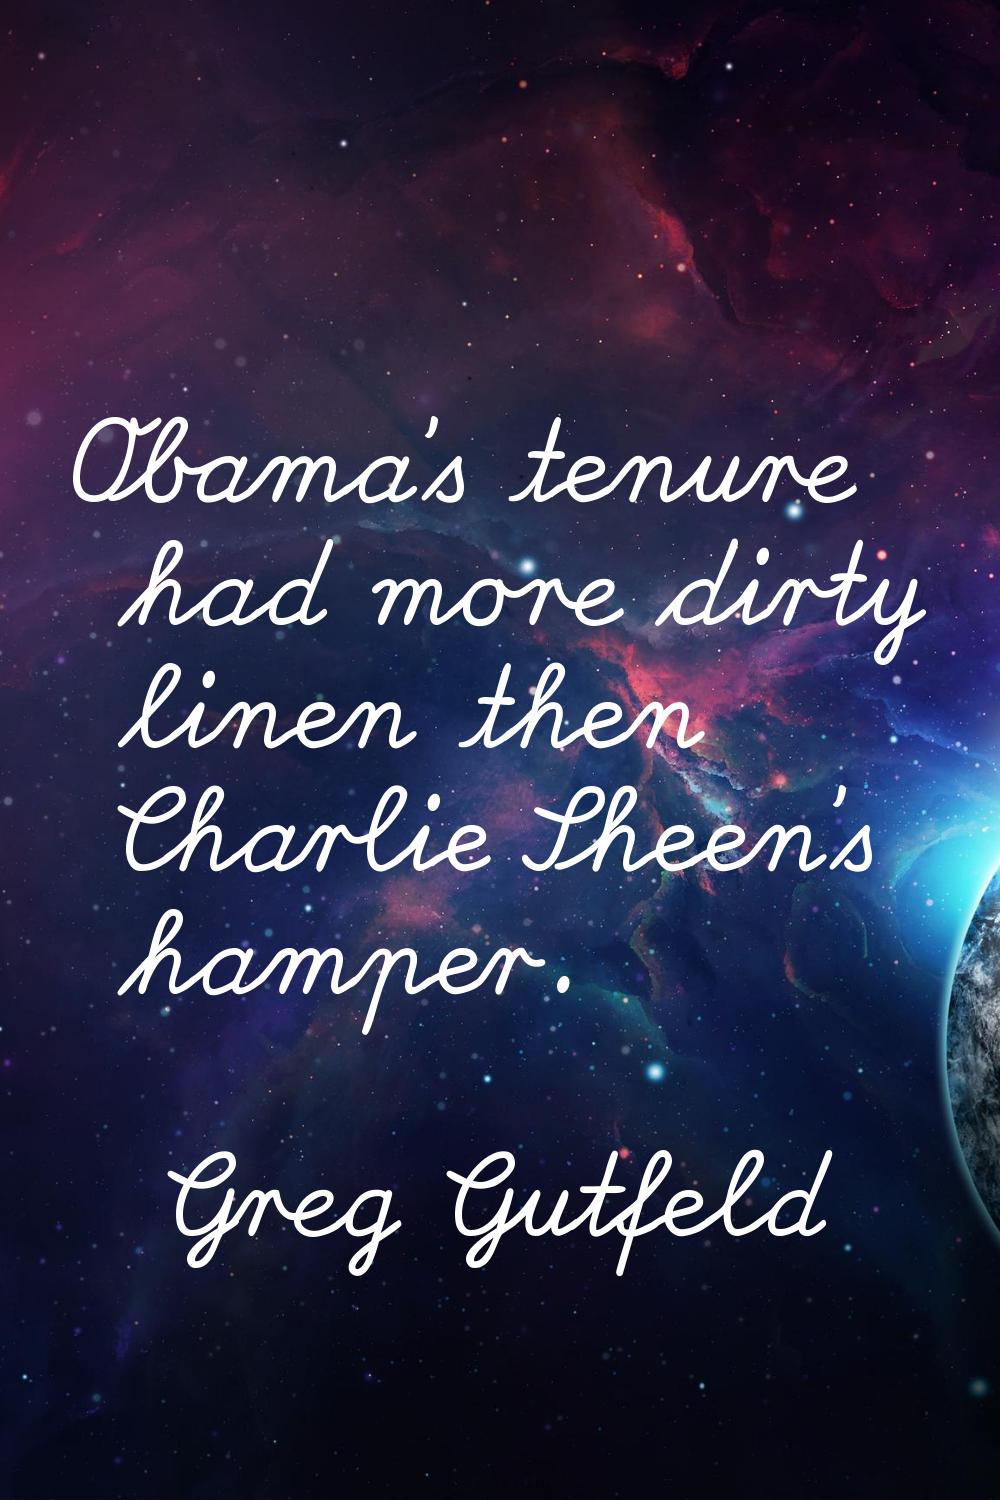 Obama's tenure had more dirty linen then Charlie Sheen's hamper.